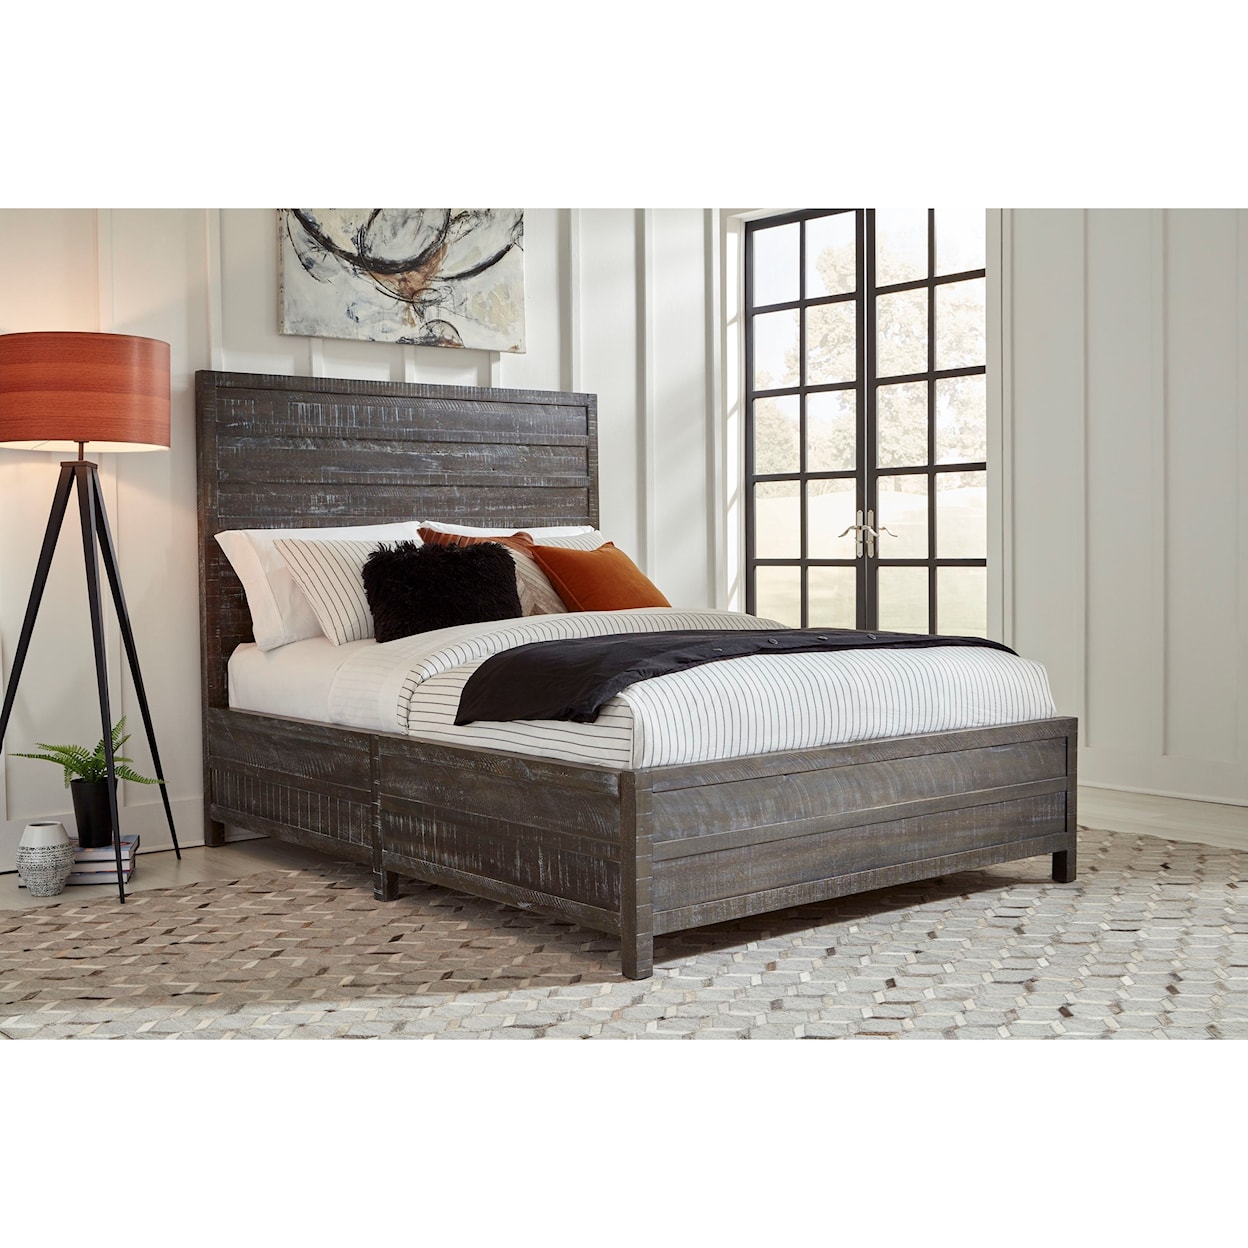 Modus International Townsend California King Low-Profile Bed